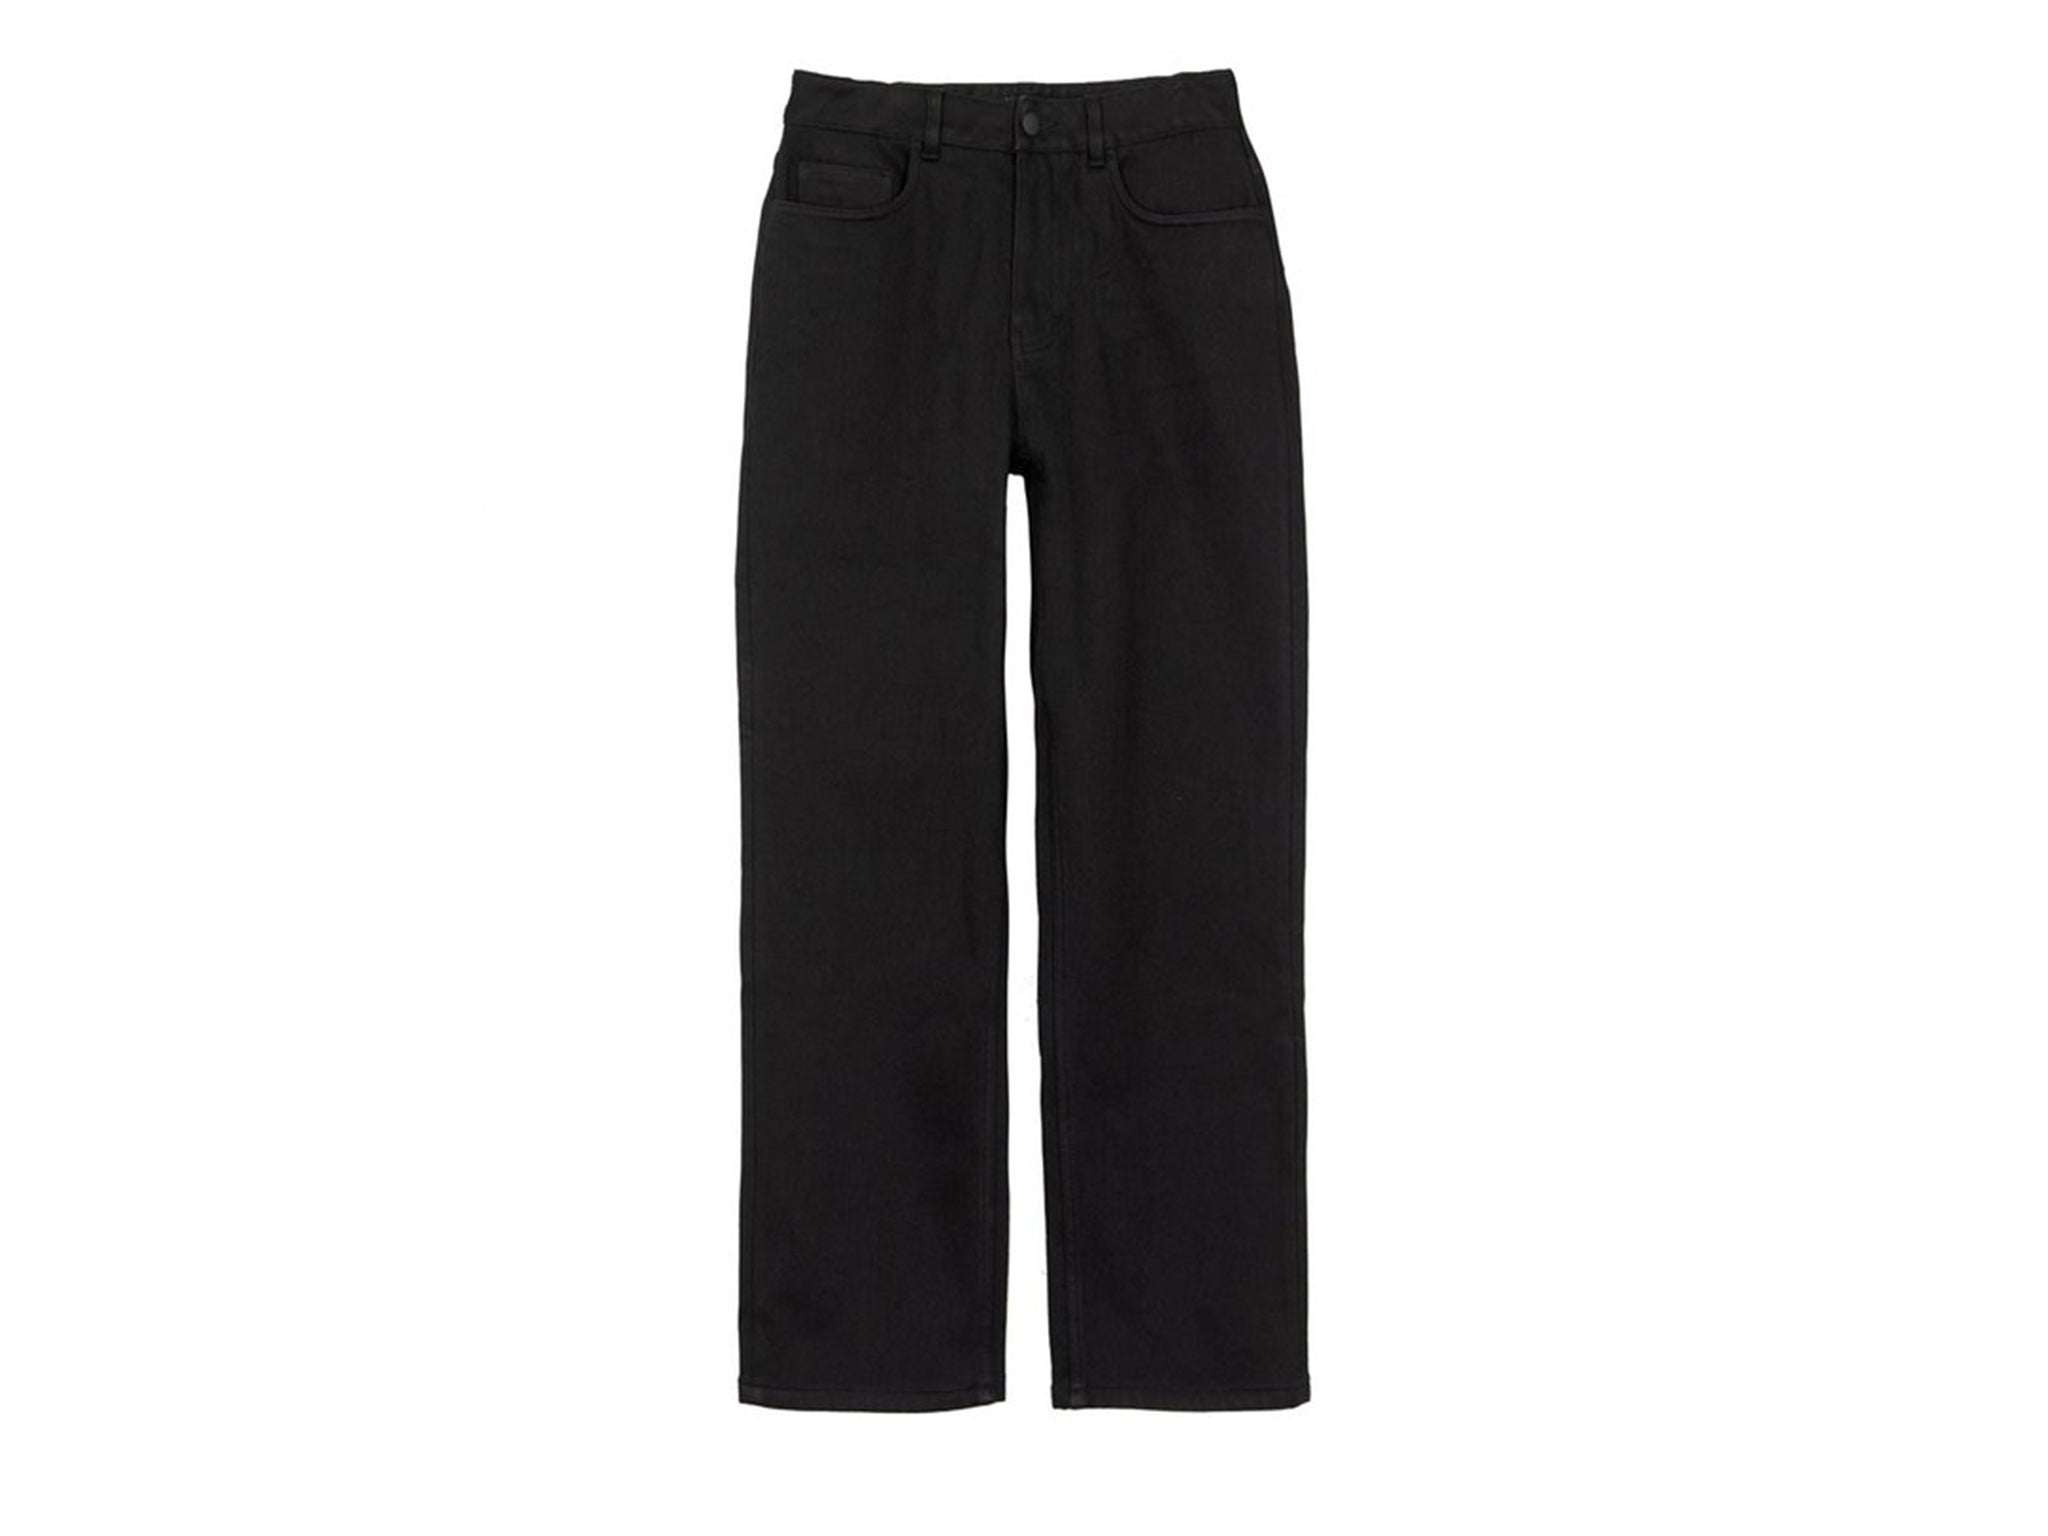 Fleece-lined jeans: High-waisted trousers that keep you warm